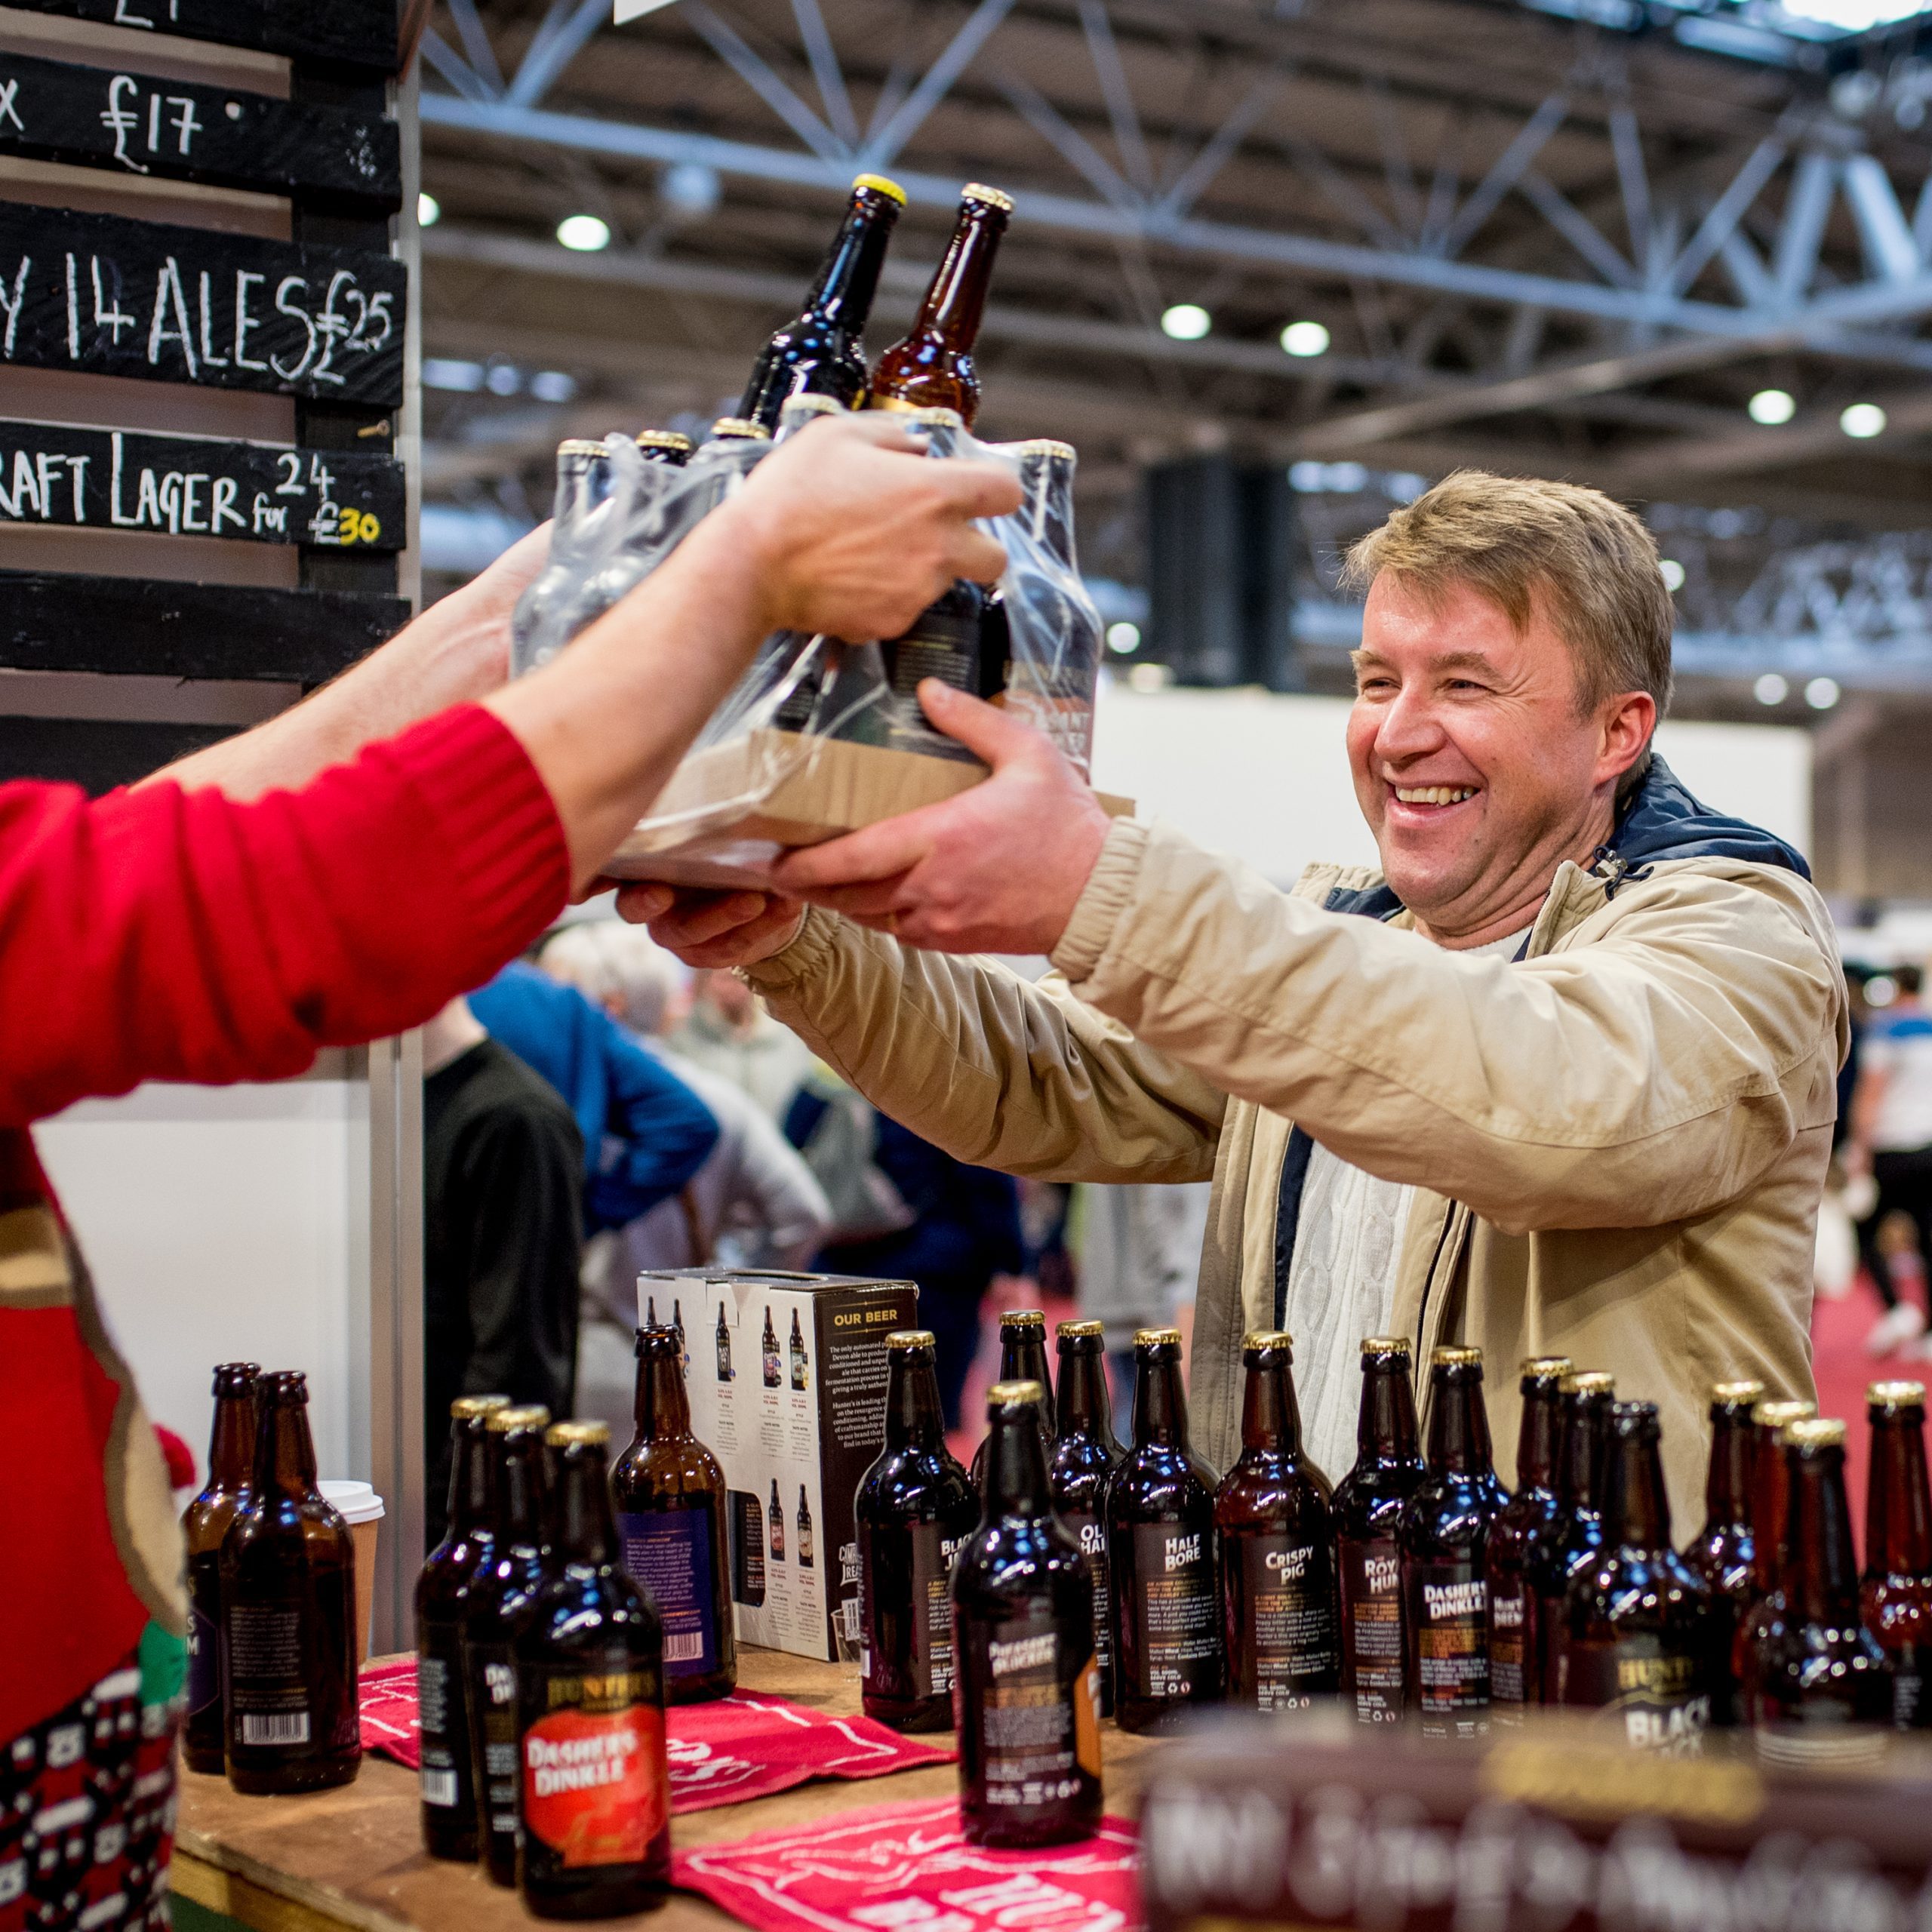 Exchange of a shrinkwrapped tray of beer bottles being passed between exhibitor and customer